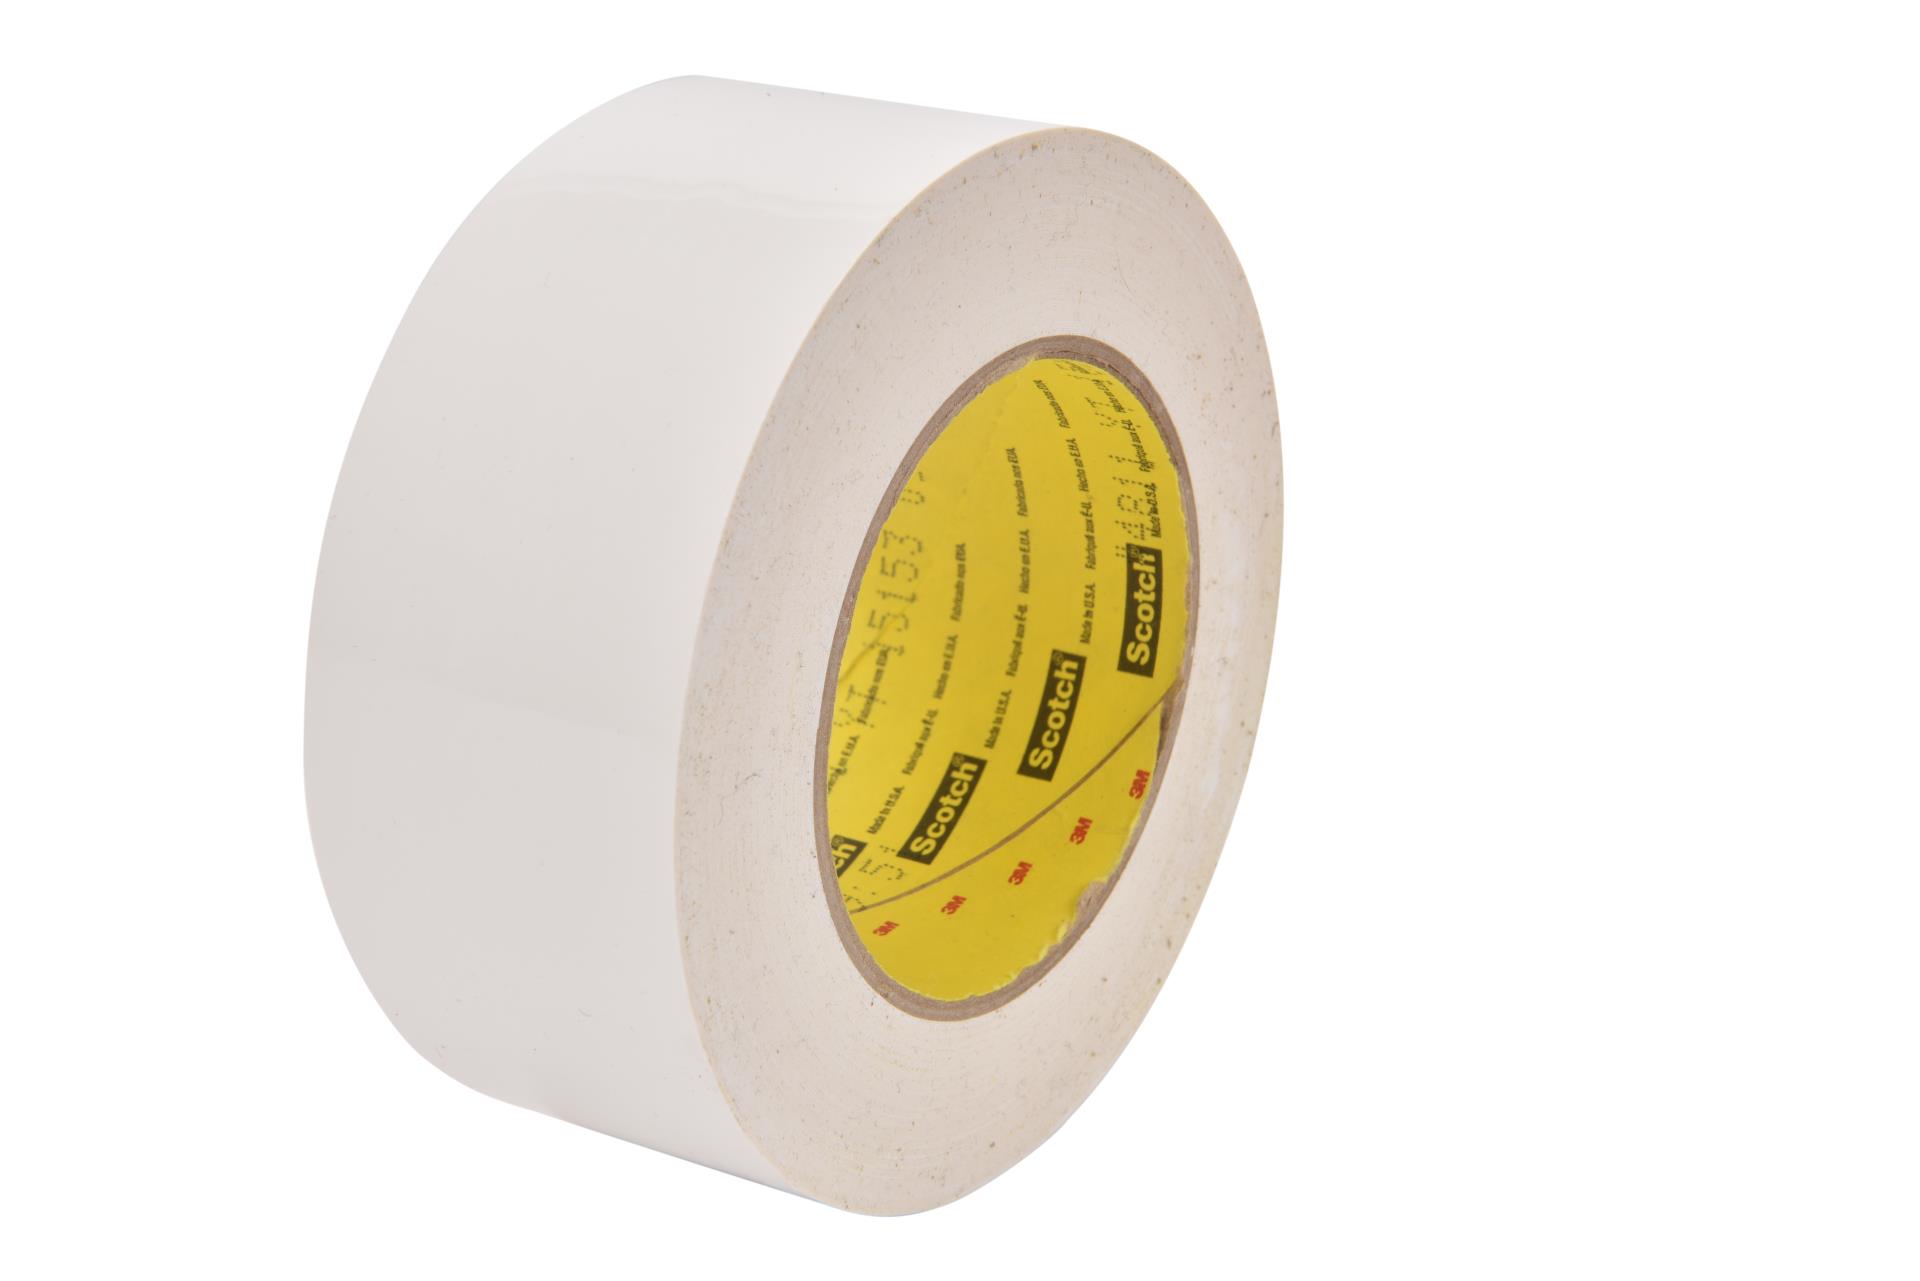 4 Rolls 3M X-Series High Tack Double Coated Tape  XT6110  1/2 in x 36 yd 